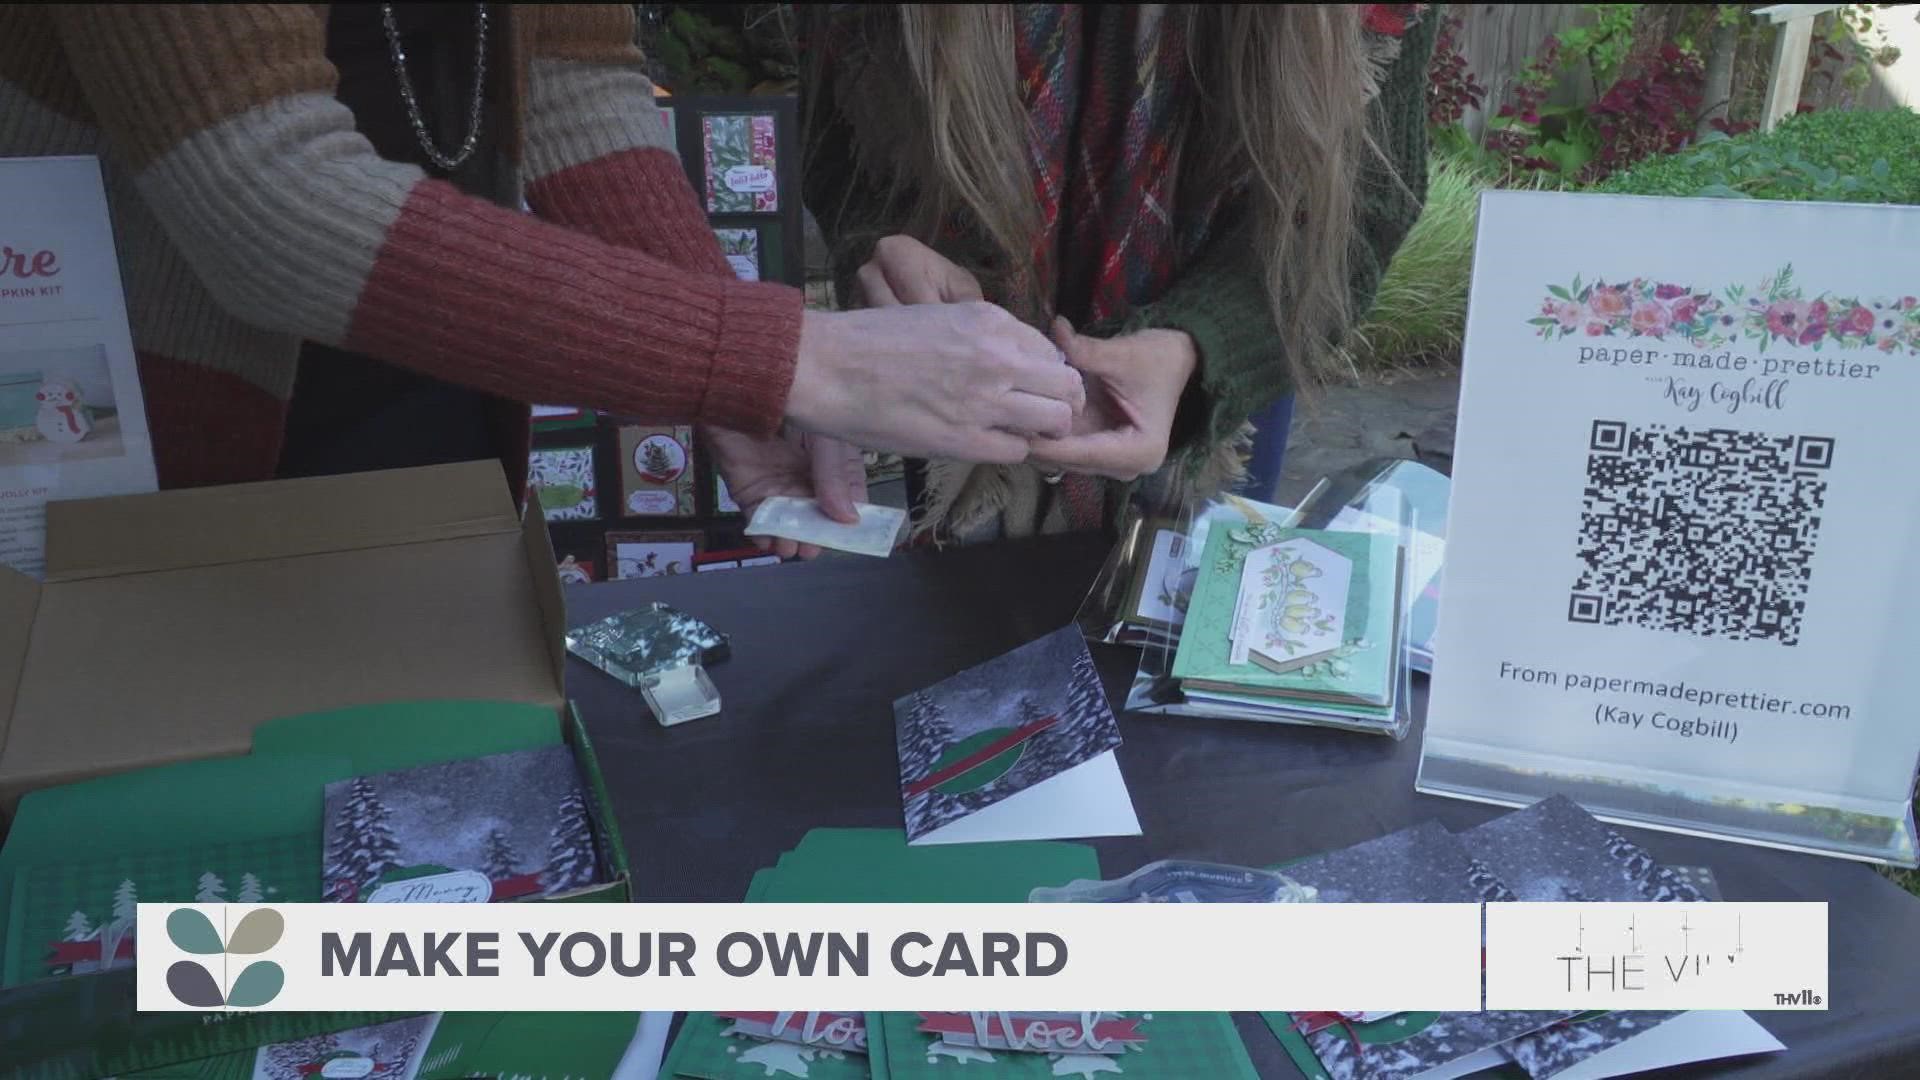 PaperMadePrettier offers classes that will show you how to create your own Christmas cards.